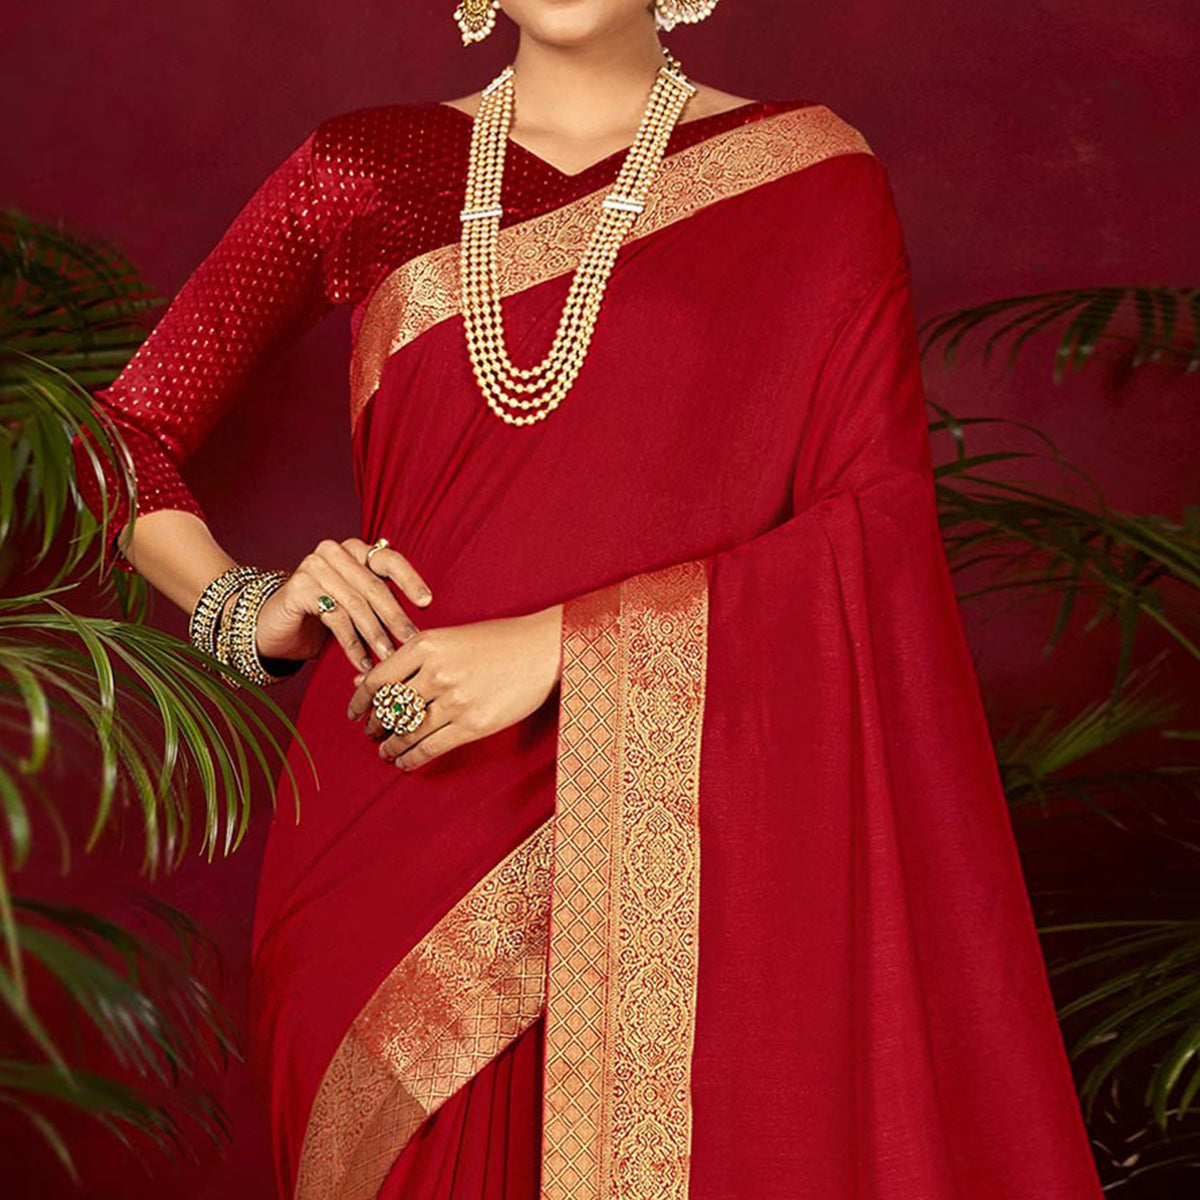 Red Solid Vichitra Silk Saree With Woven Border